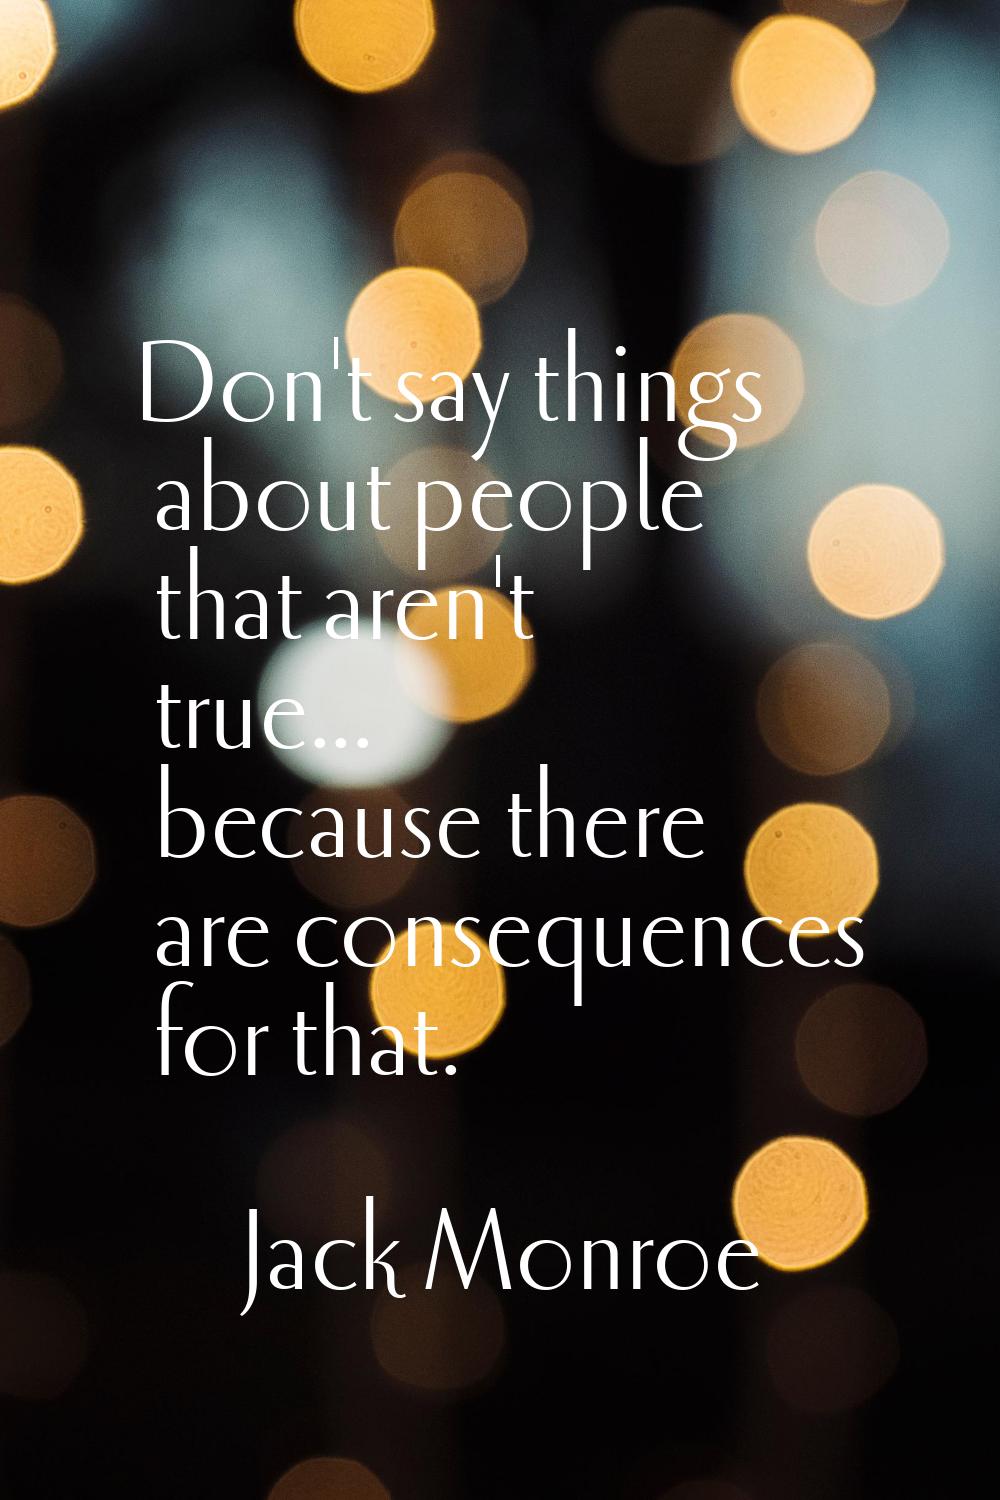 Don't say things about people that aren't true... because there are consequences for that.